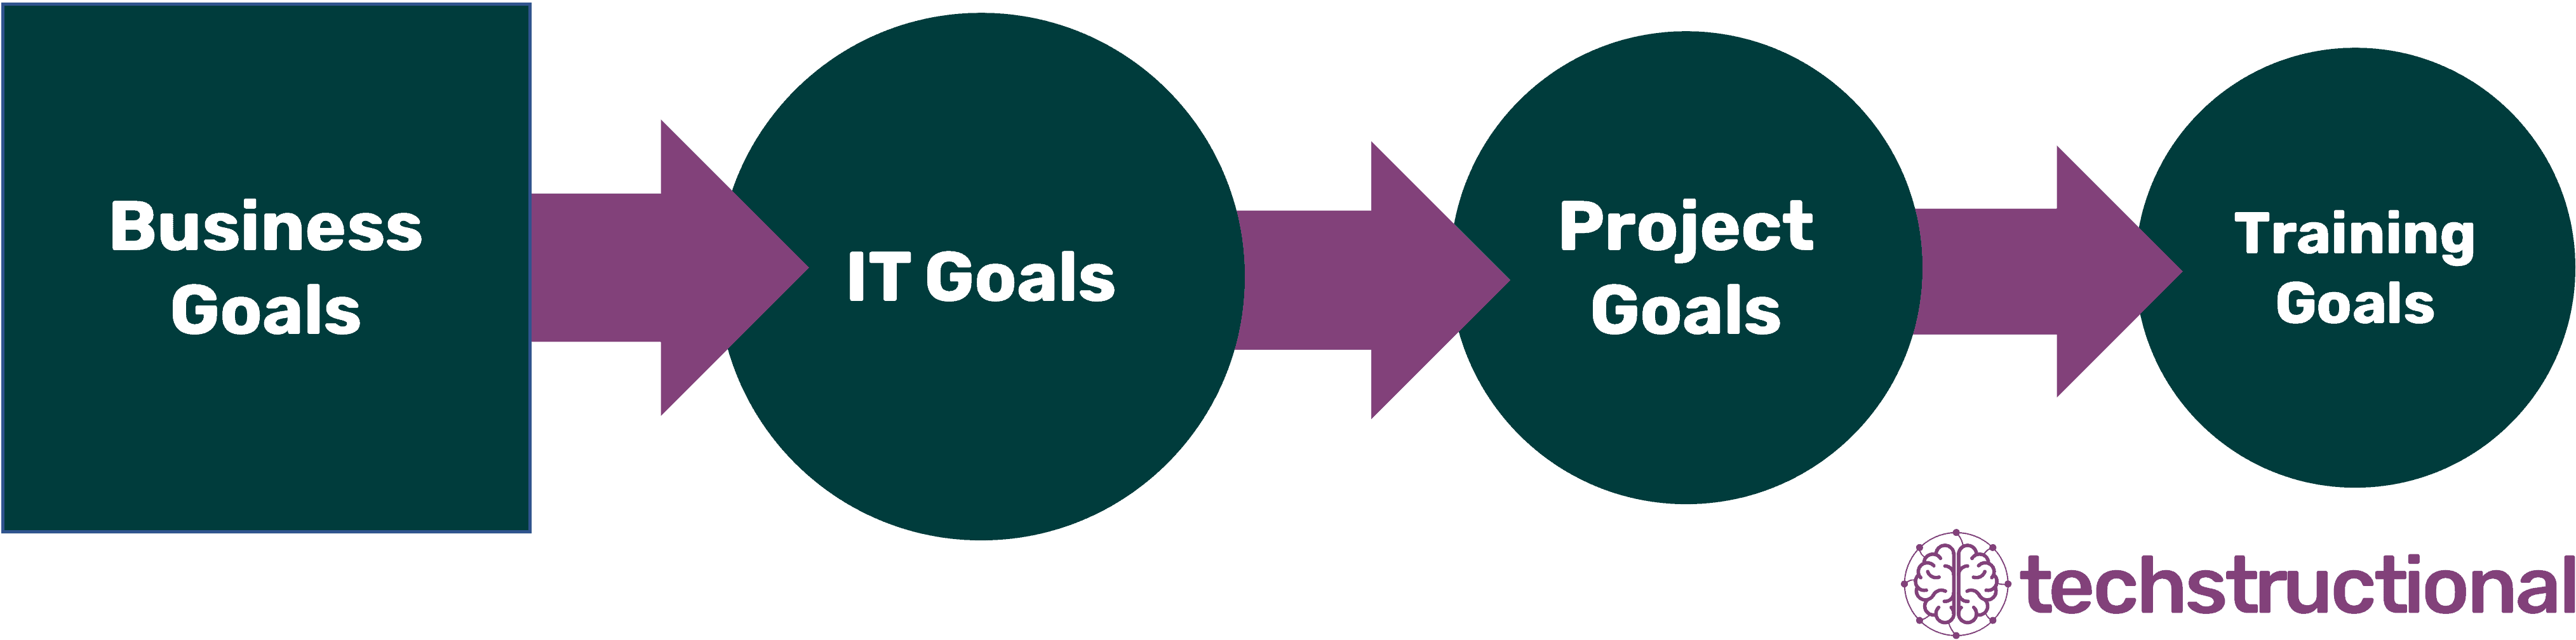 Business to Training Goal Connection

Business Goals -> IT Goals -> Project Goals -> Training Goals